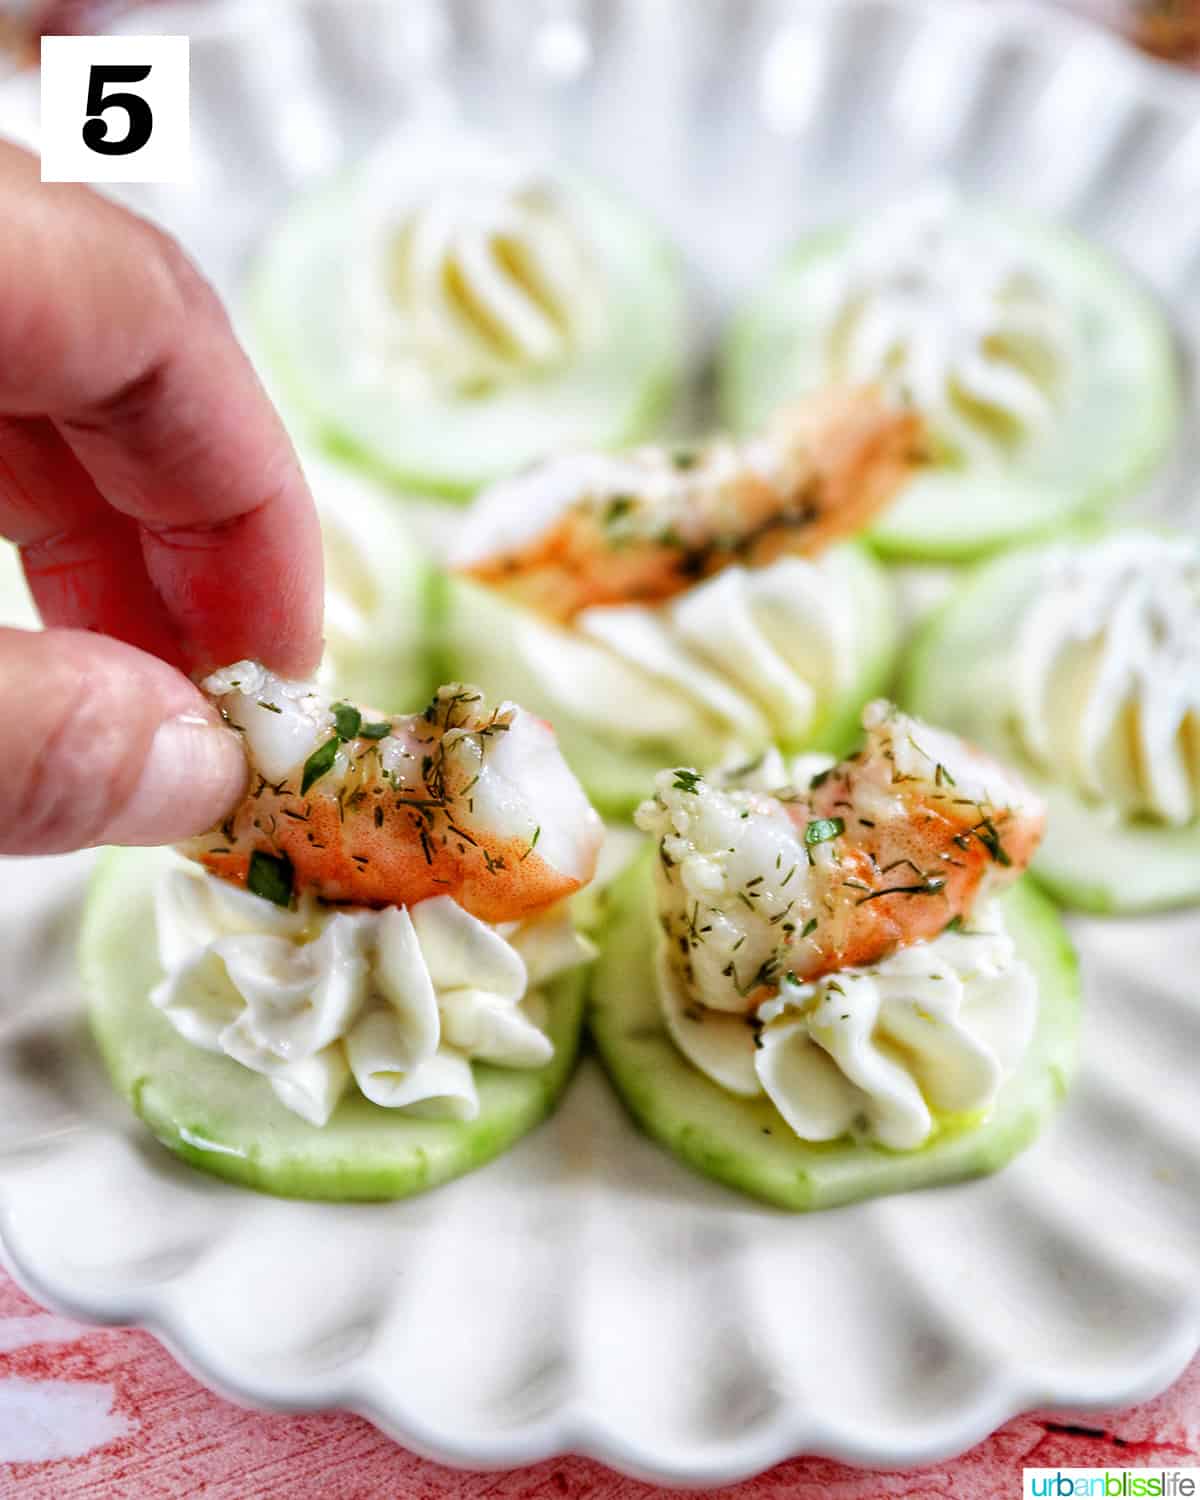 hand placing a prawn on a cucumber cream cheese canapé appetizer on a scalloped plate.